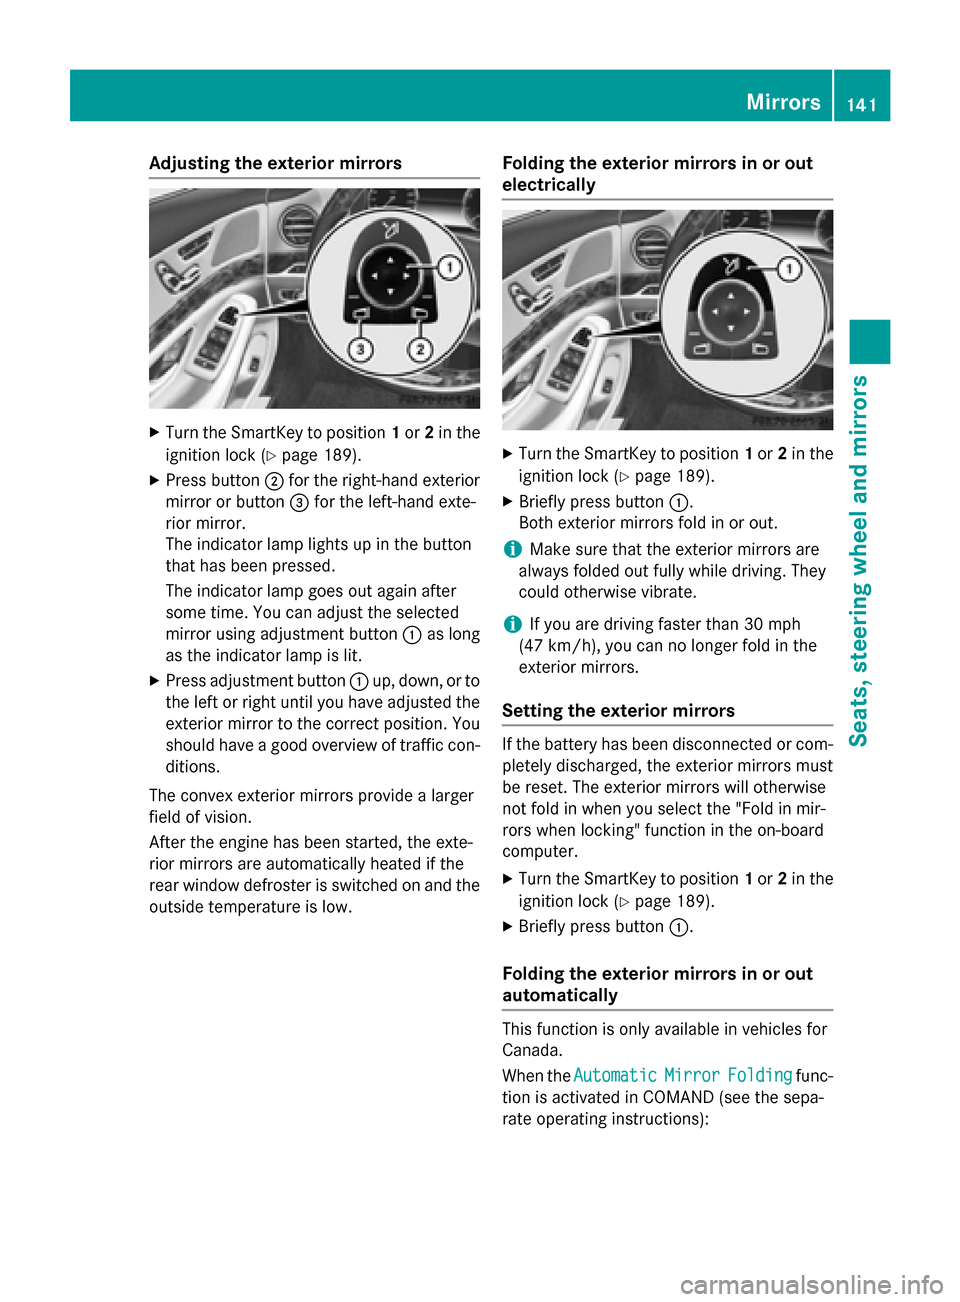 MERCEDES-BENZ S-Class 2015 W222 Owners Manual Adjusting the exterior mirrors
X
Turn the SmartKey to position 1or 2in the
ignition lock (Y page 189).
X Press button ;for the right-hand exterior
mirror or button =for the left-hand exte-
rior mirror